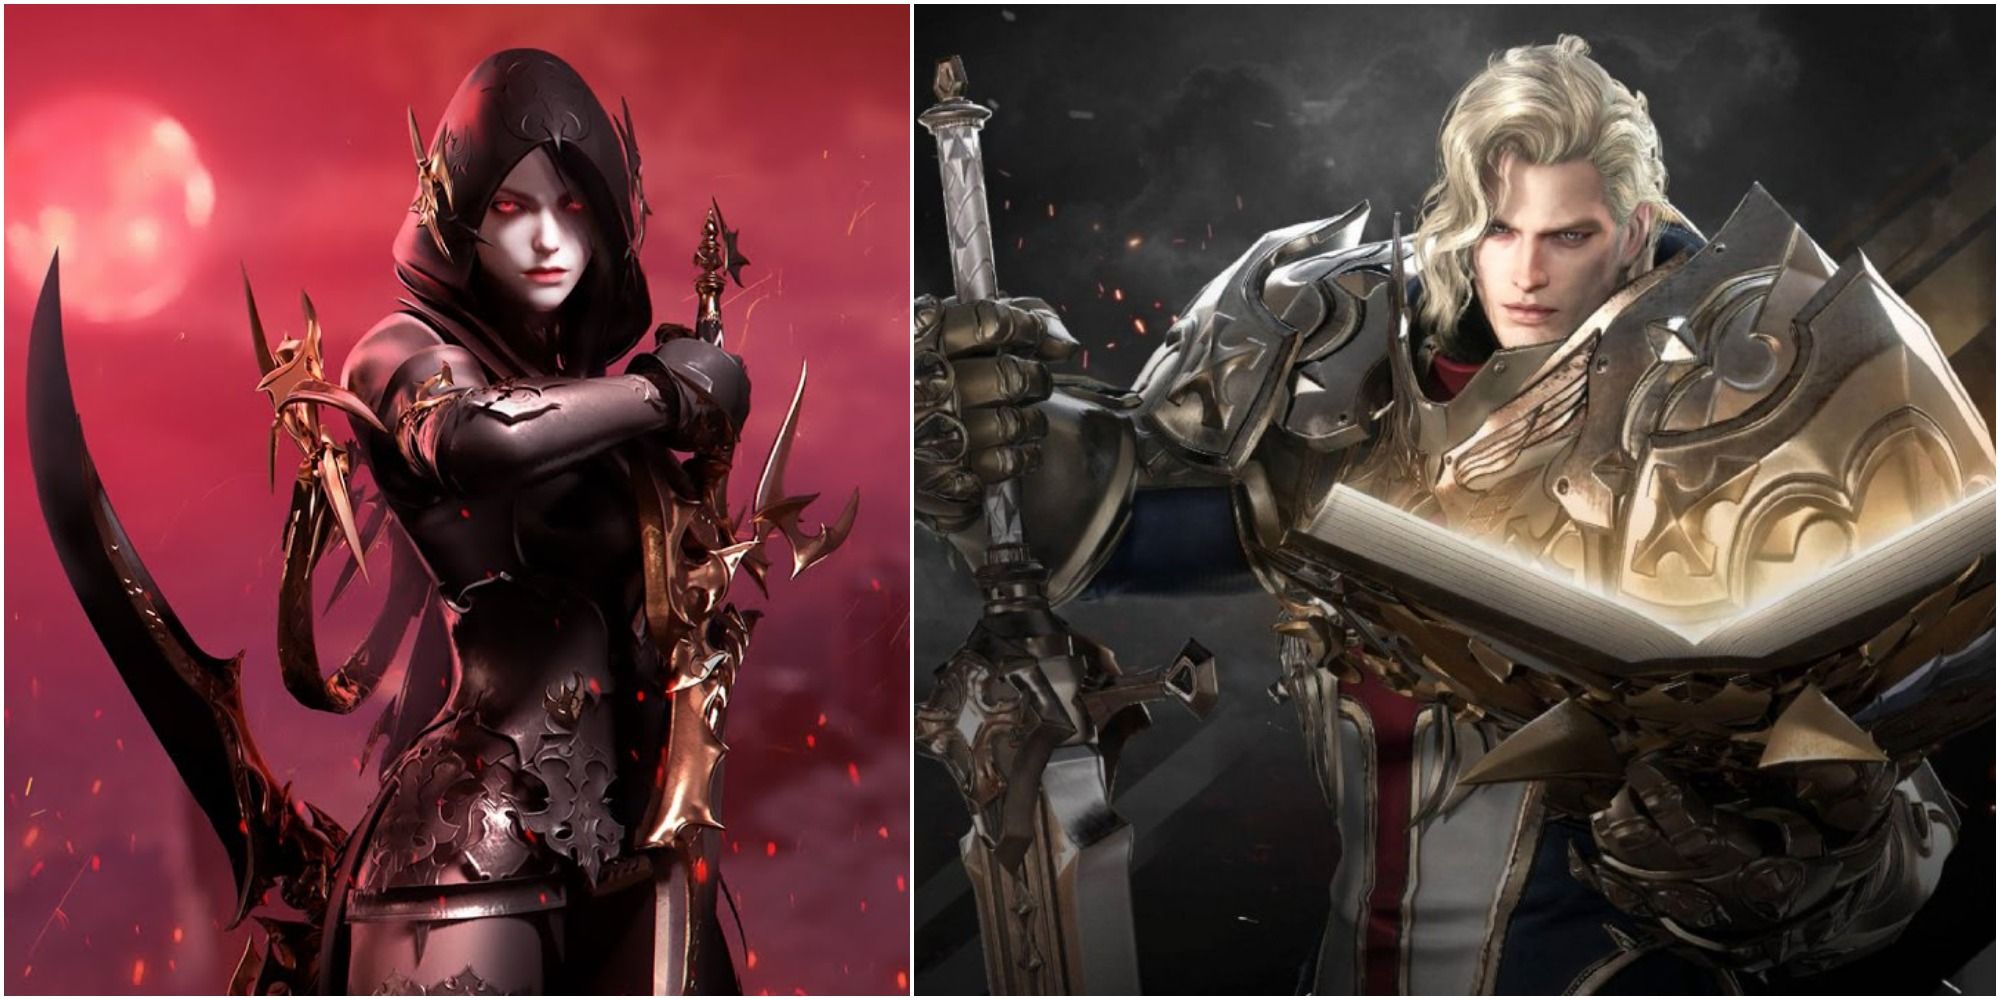 Lost Ark split image of Shadowhunter with blood-red background and Paladin holding book and sword